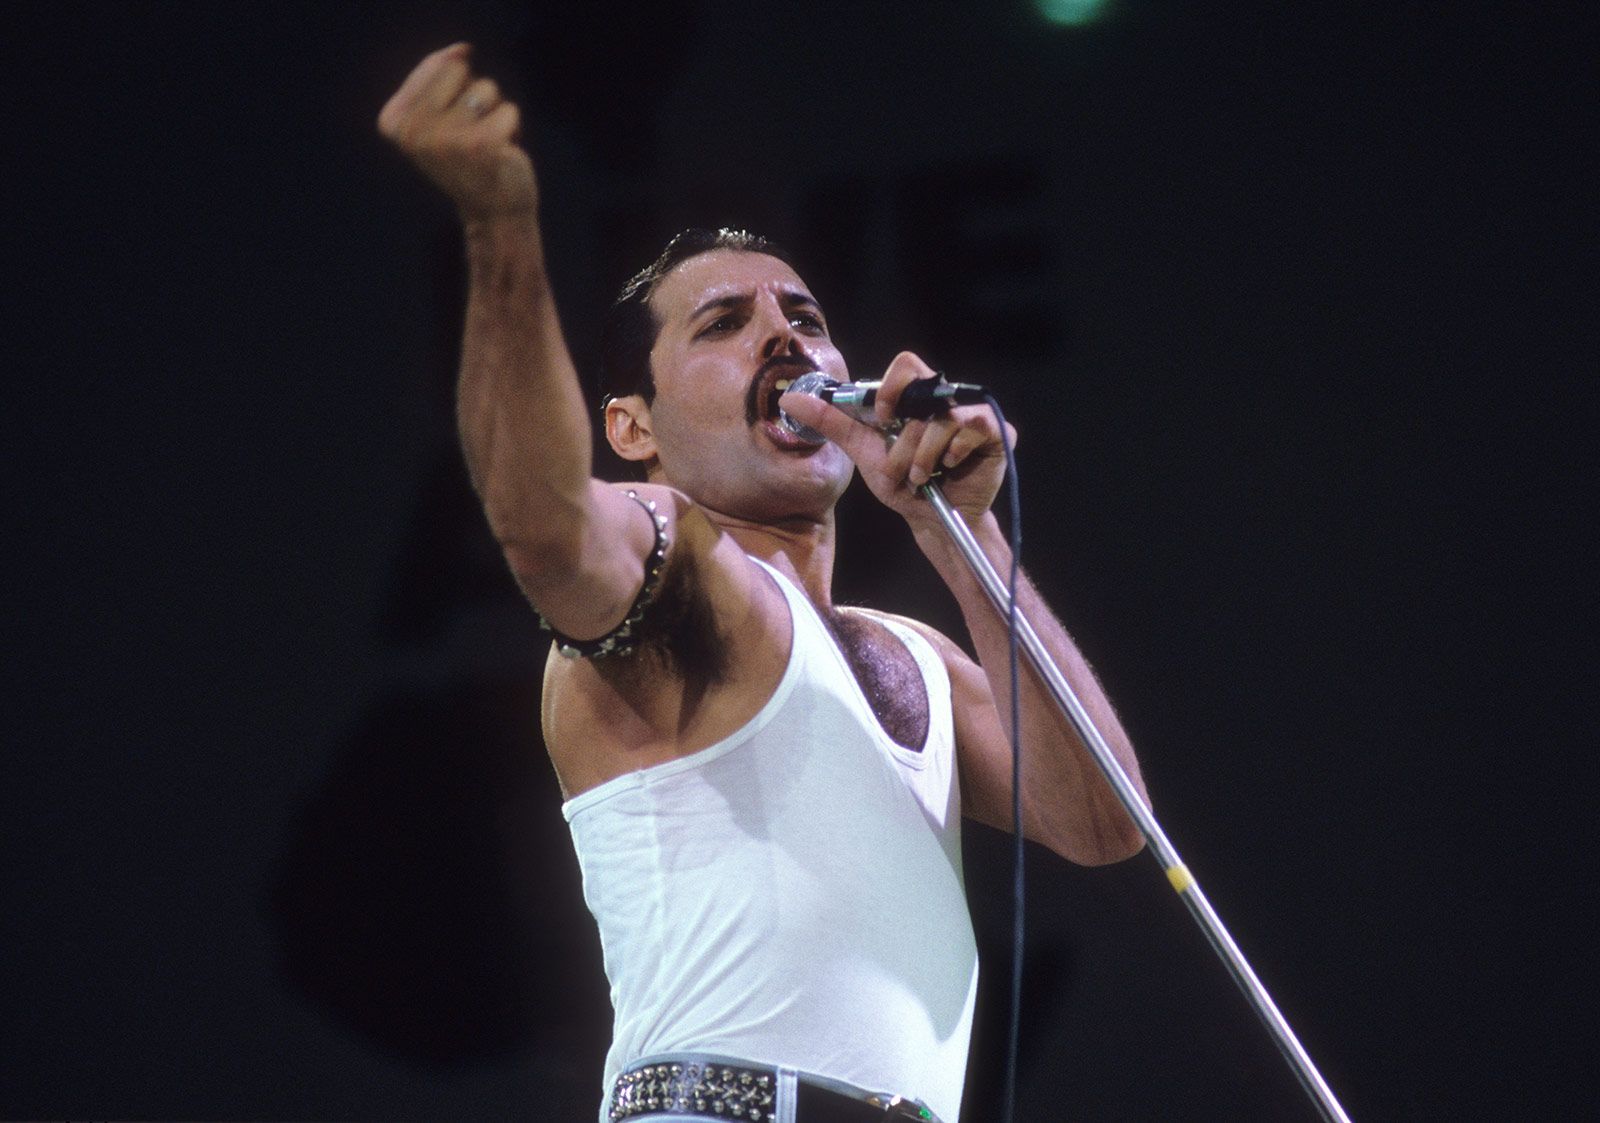 years later, Queen's Live Aid performance is still pure magic